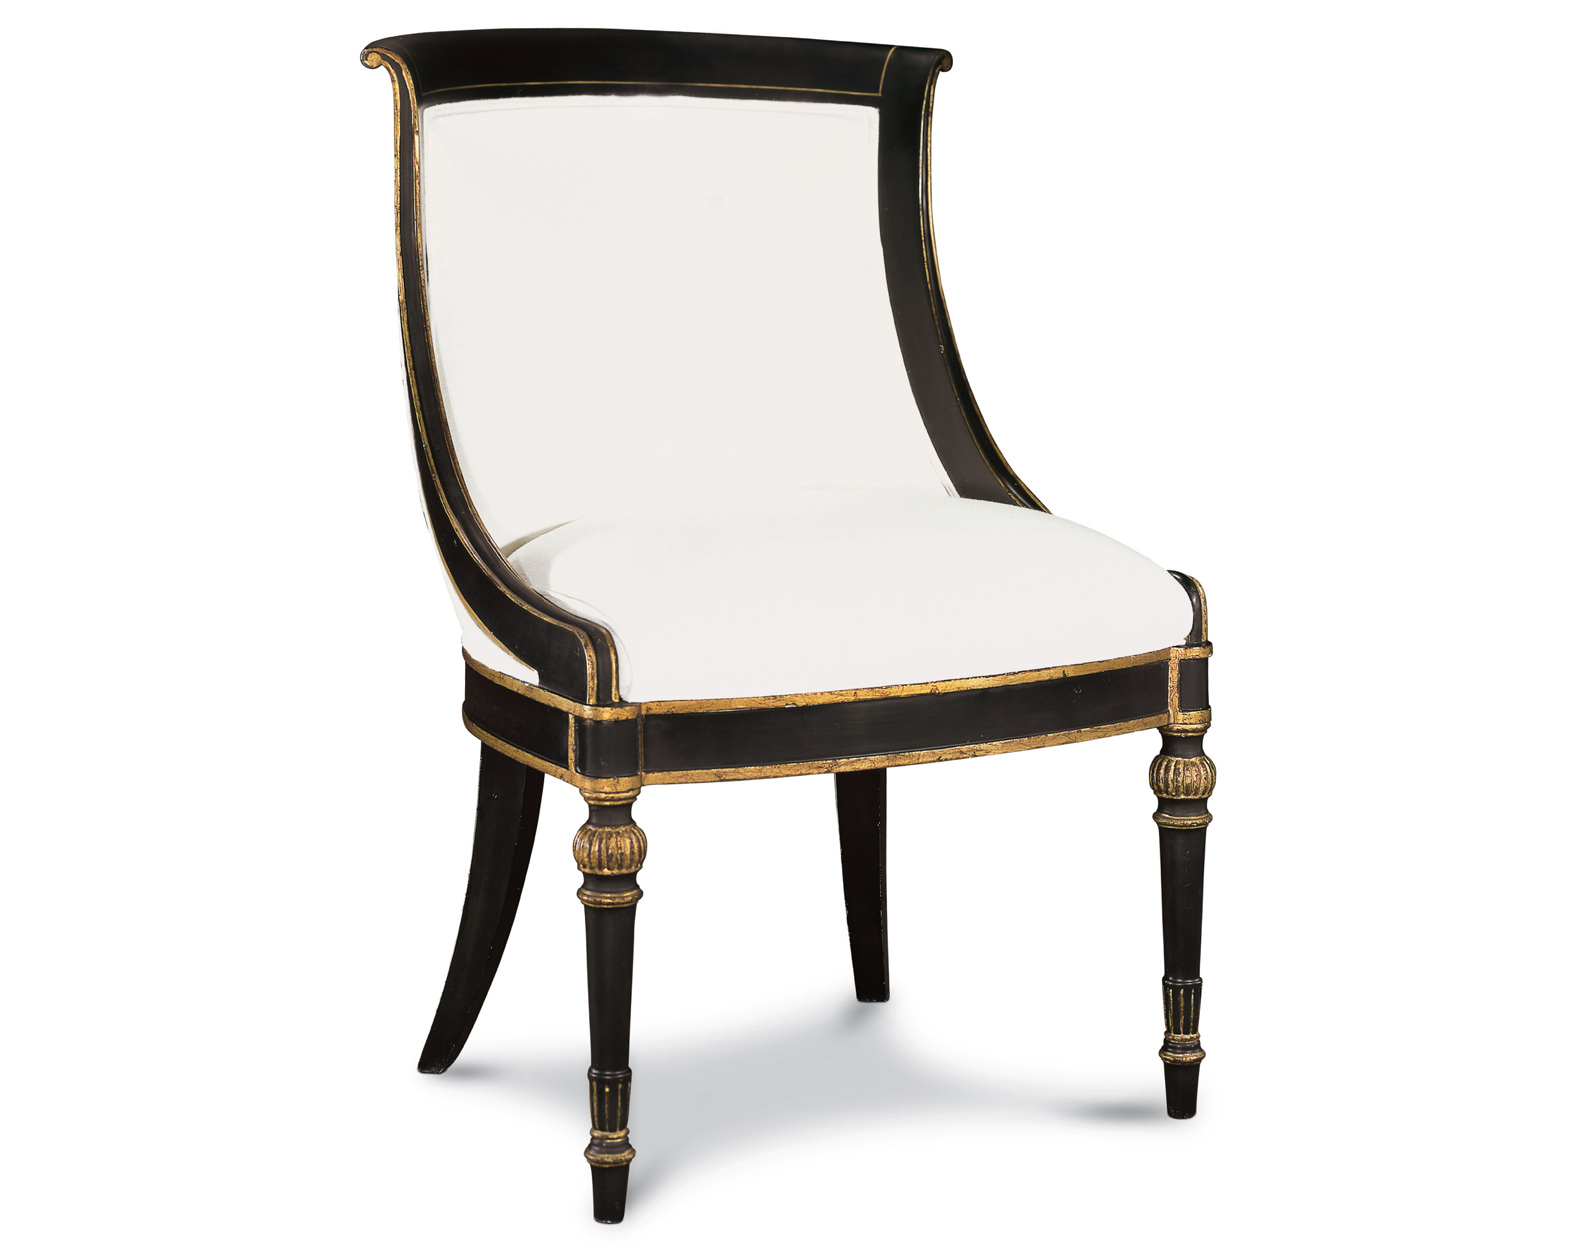 WALES REGENCY CHAIR WITH UPHOLSTERED BACK